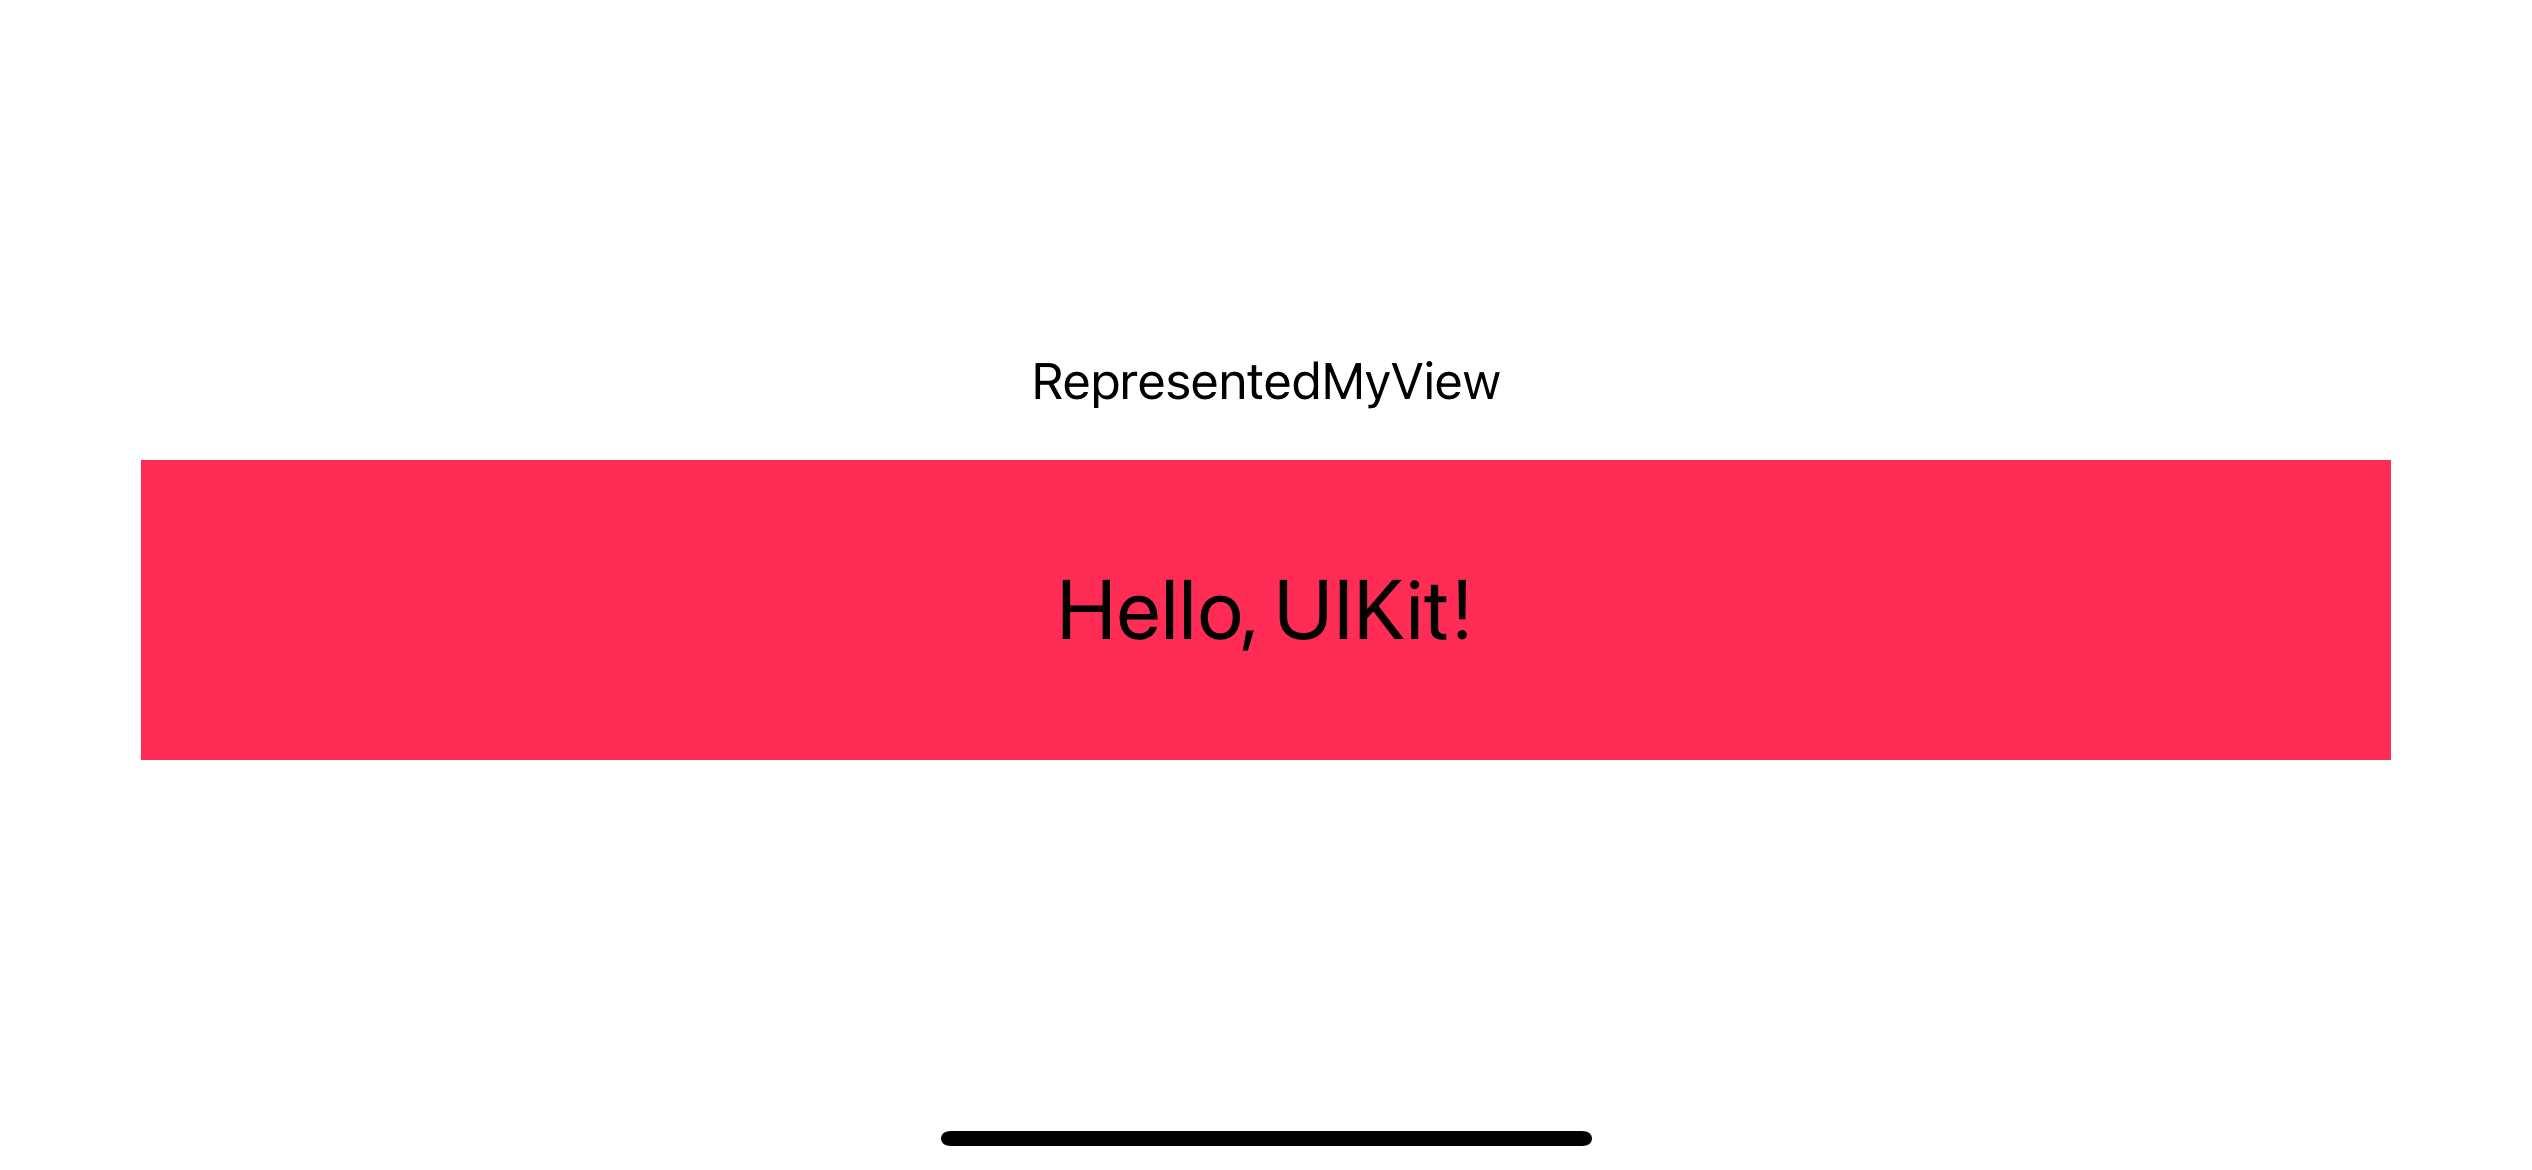 Using RepresentedMyView along side with a SwiftUI Text.